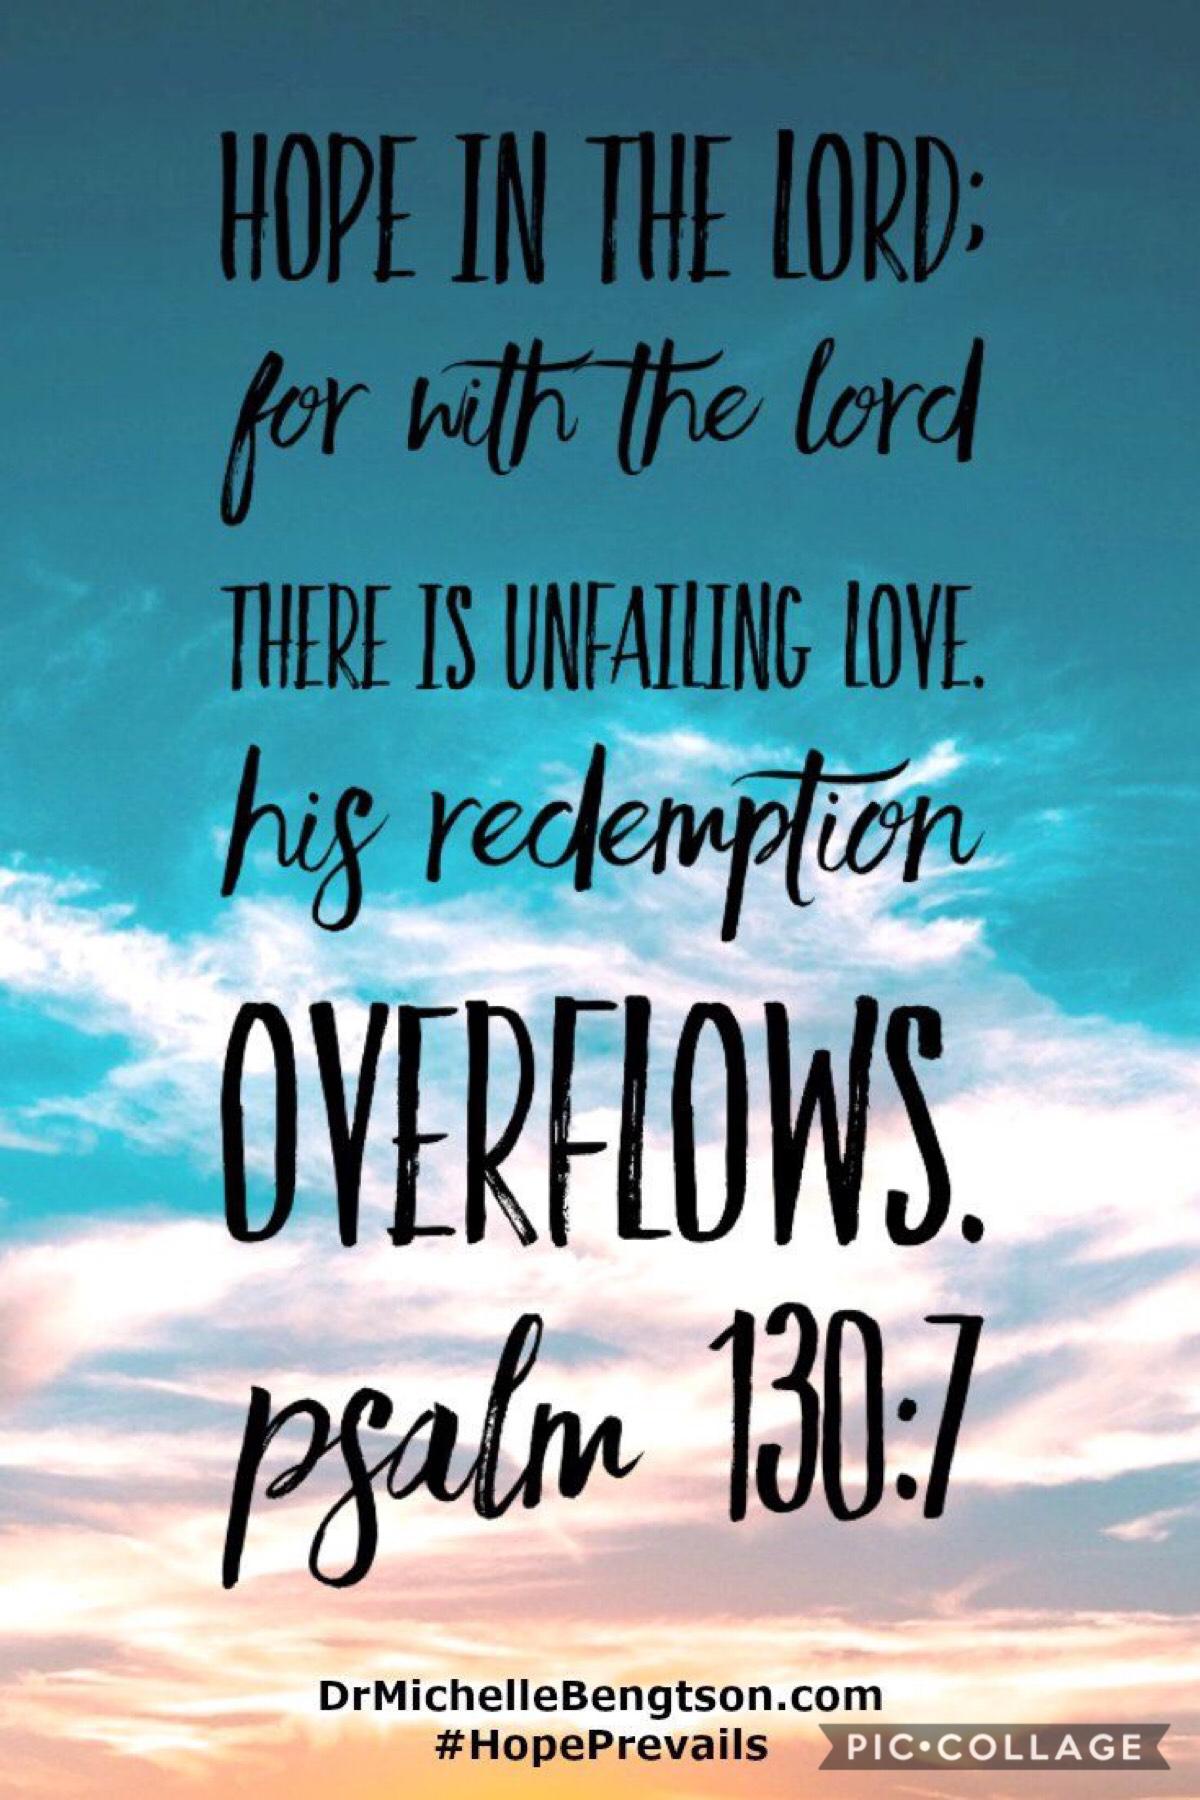 ❣️Tap❣️
Hey y’all, I’m back with my ✝️Bible Verse of the Week✝️ and I’m very sorry that I haven’t been posting as much as I’ve used to. It’s just because of school work and stuff, but I’m gonna try to post at least once a week! ILYSSSSM!!!